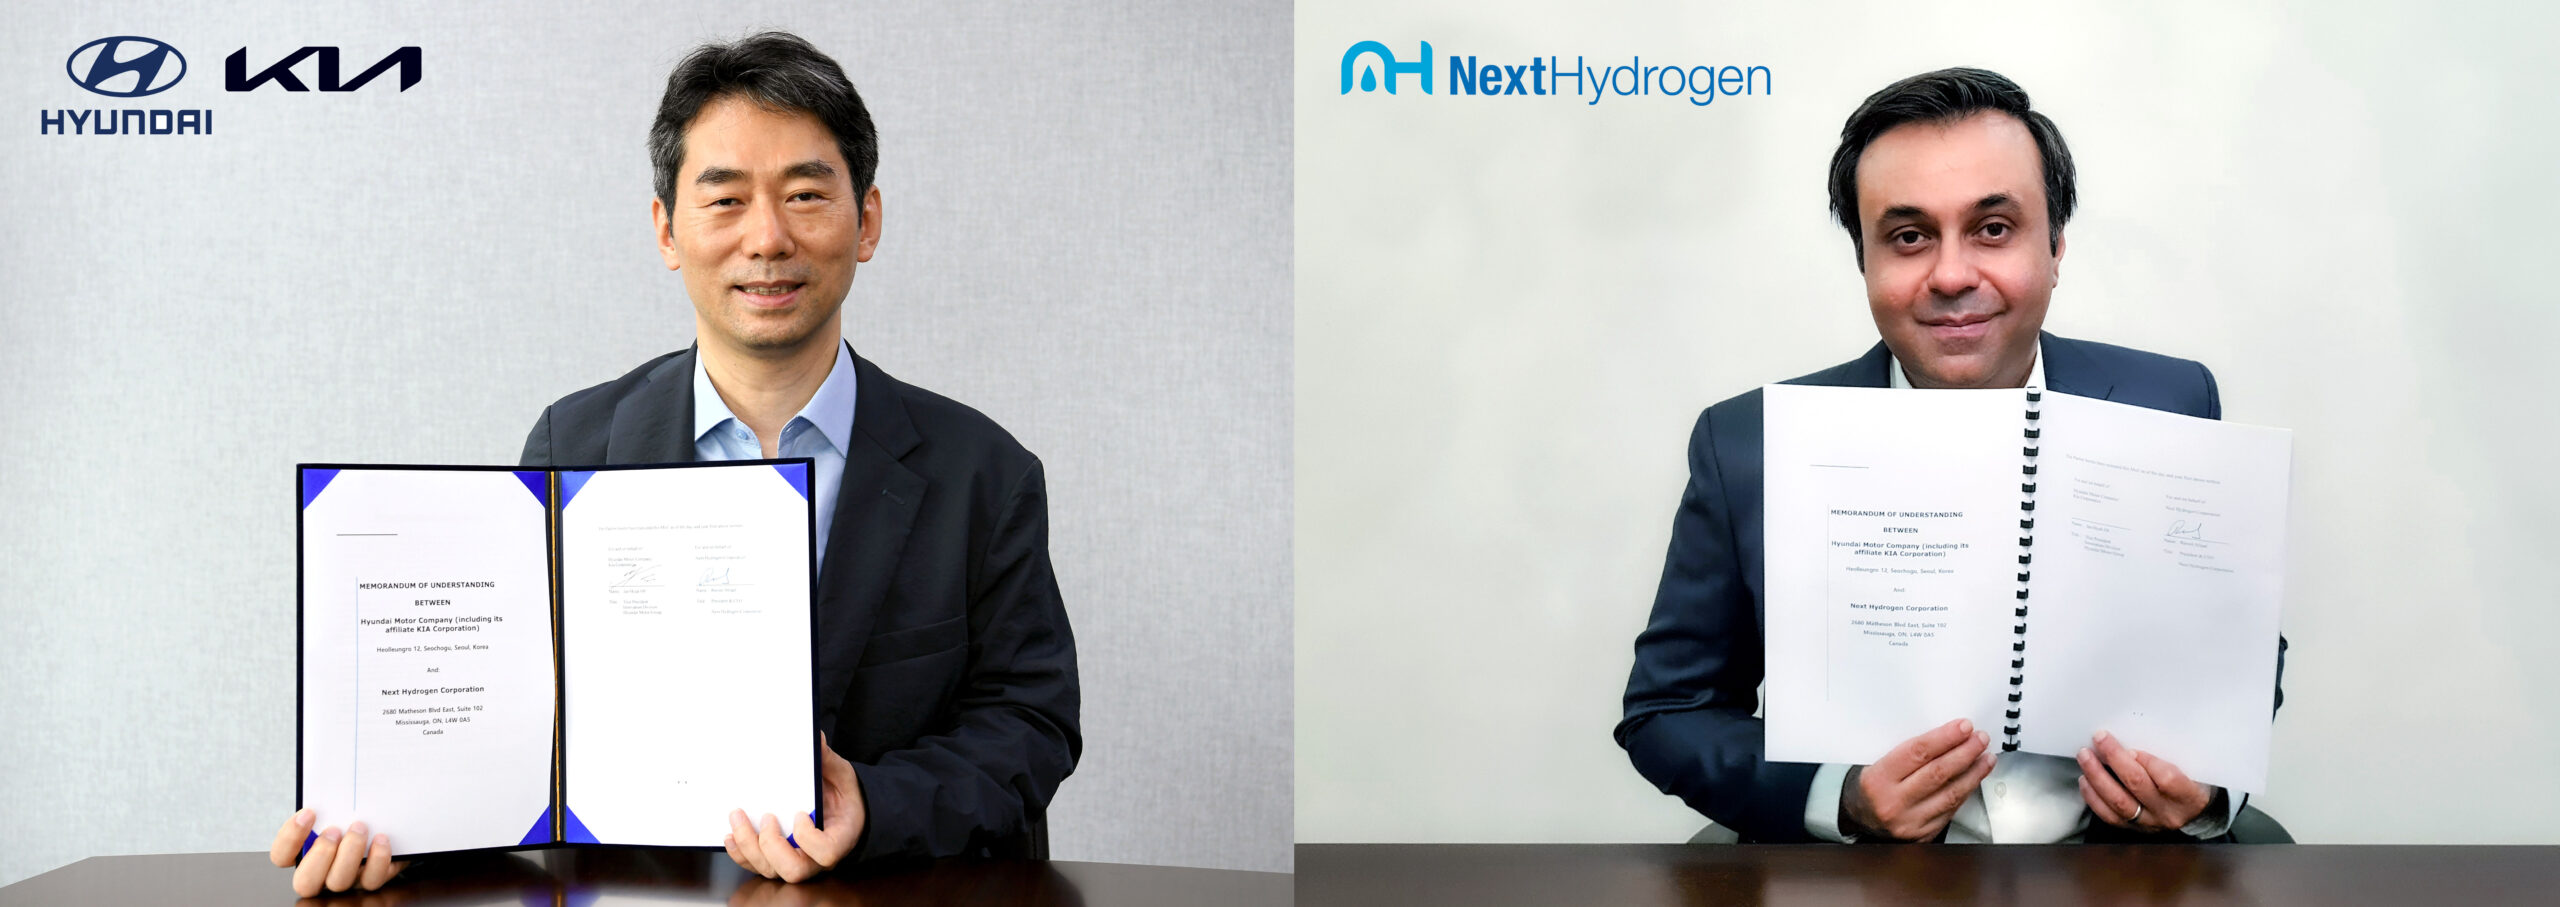 MOU Signing Between Hyundai Motor Group and Next Hydrogen